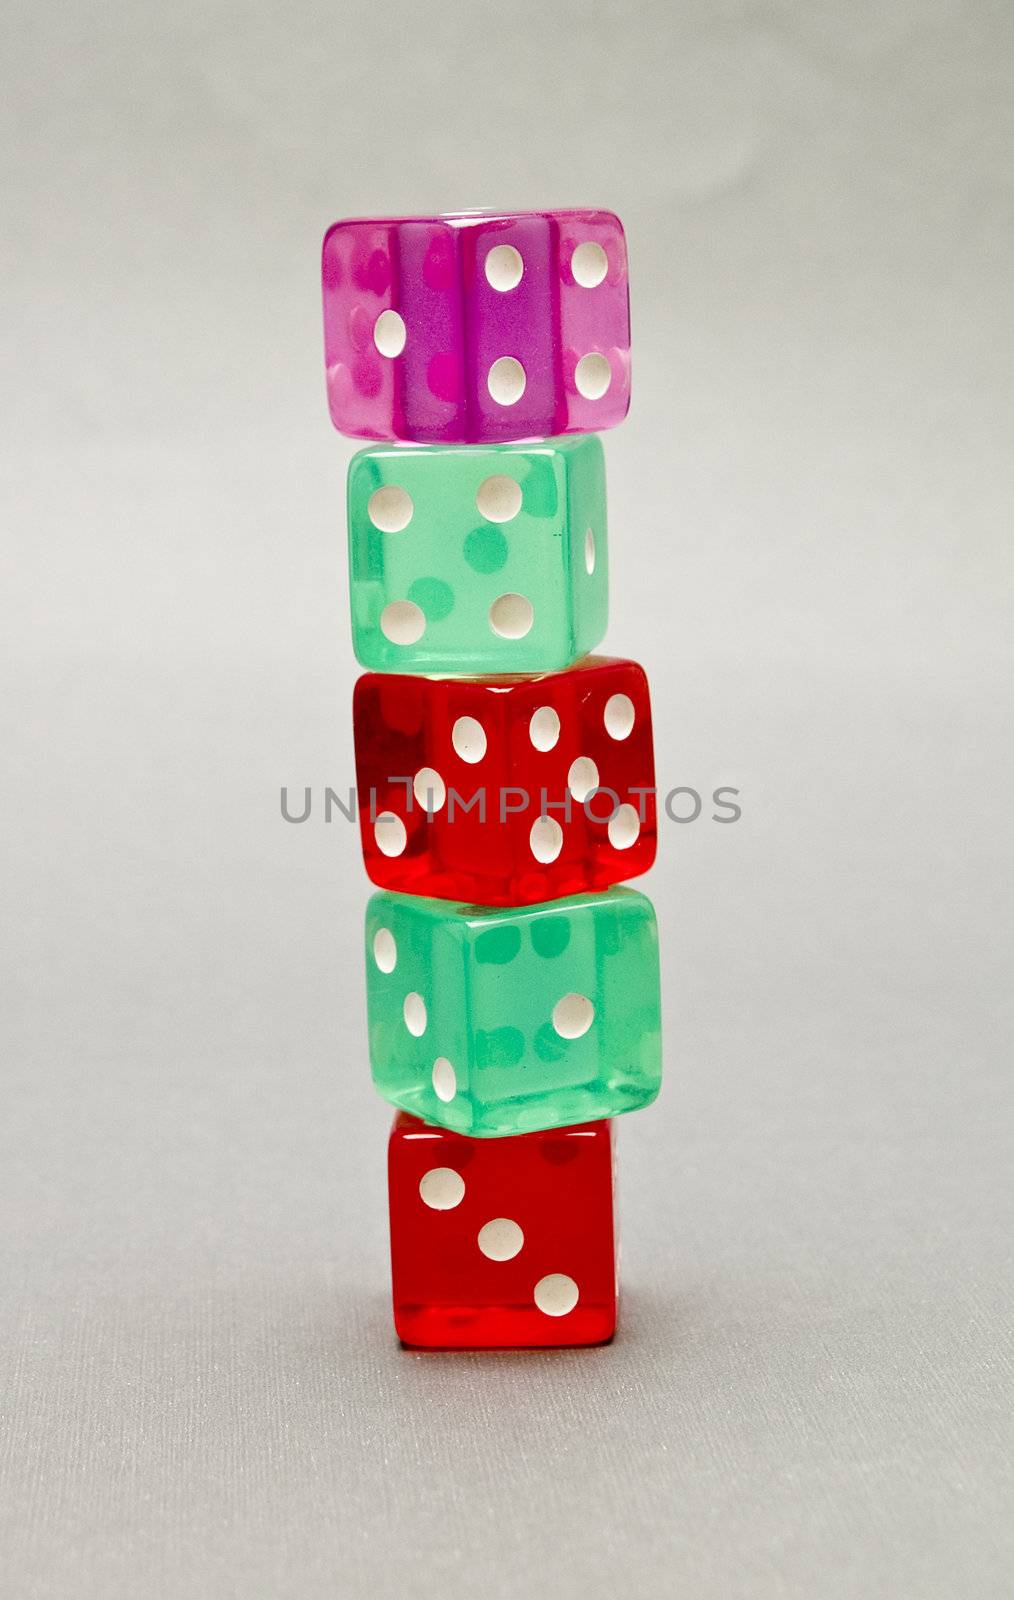  acrylic dice by lauria